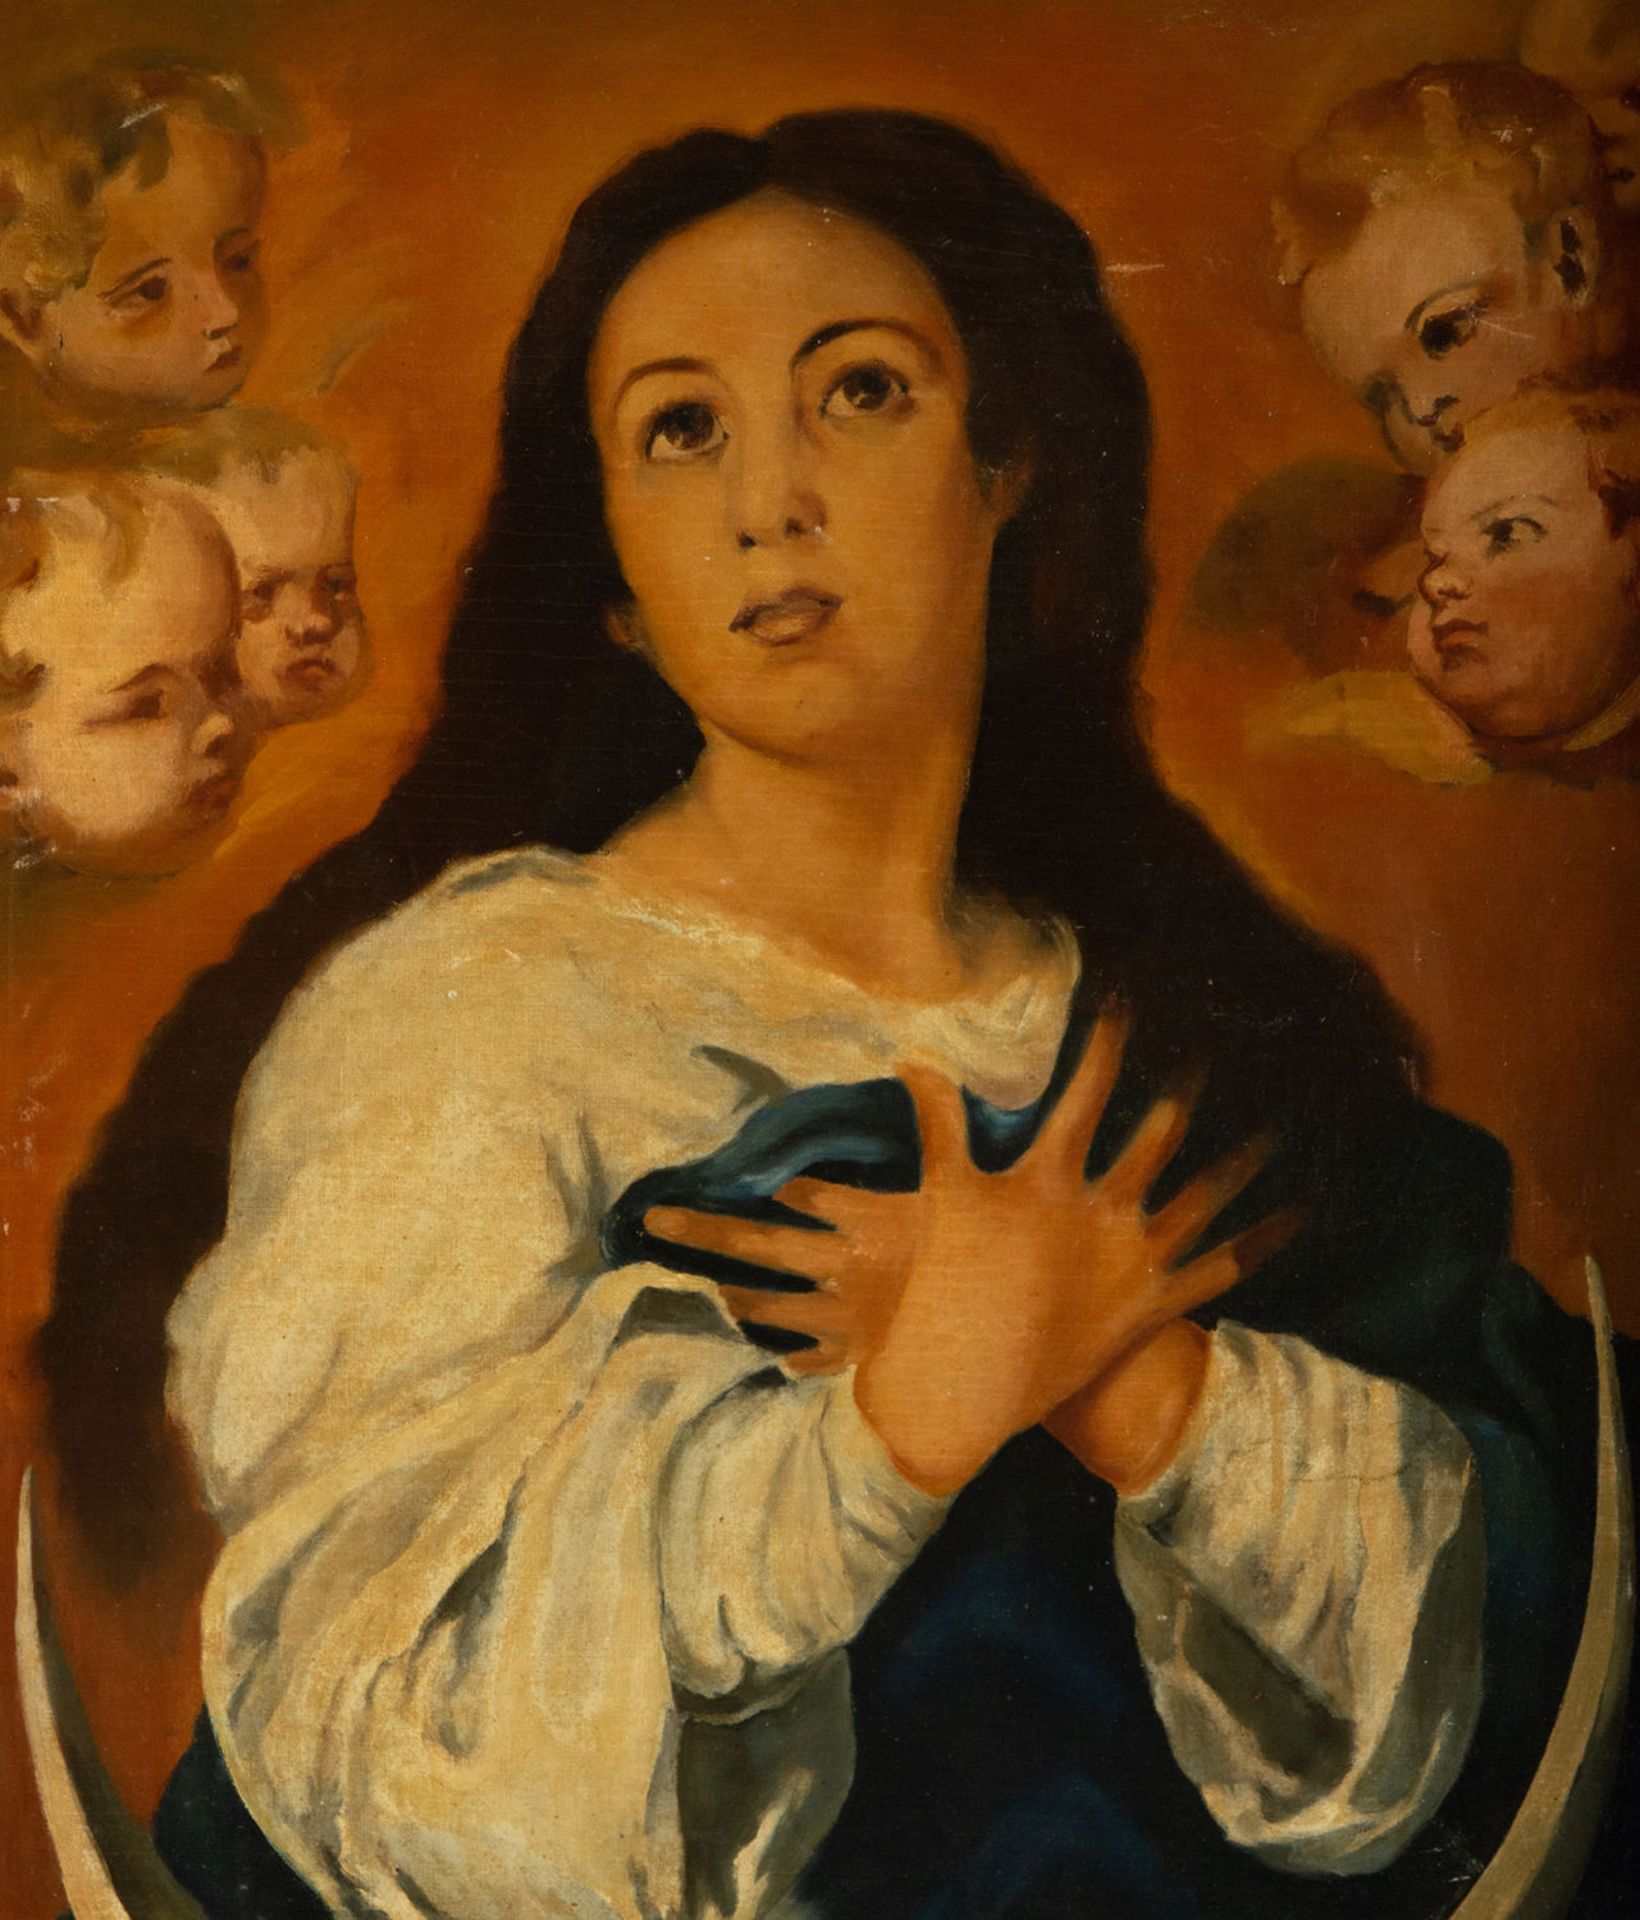 Immaculate Conception, 19th century Spanish school - Image 2 of 4